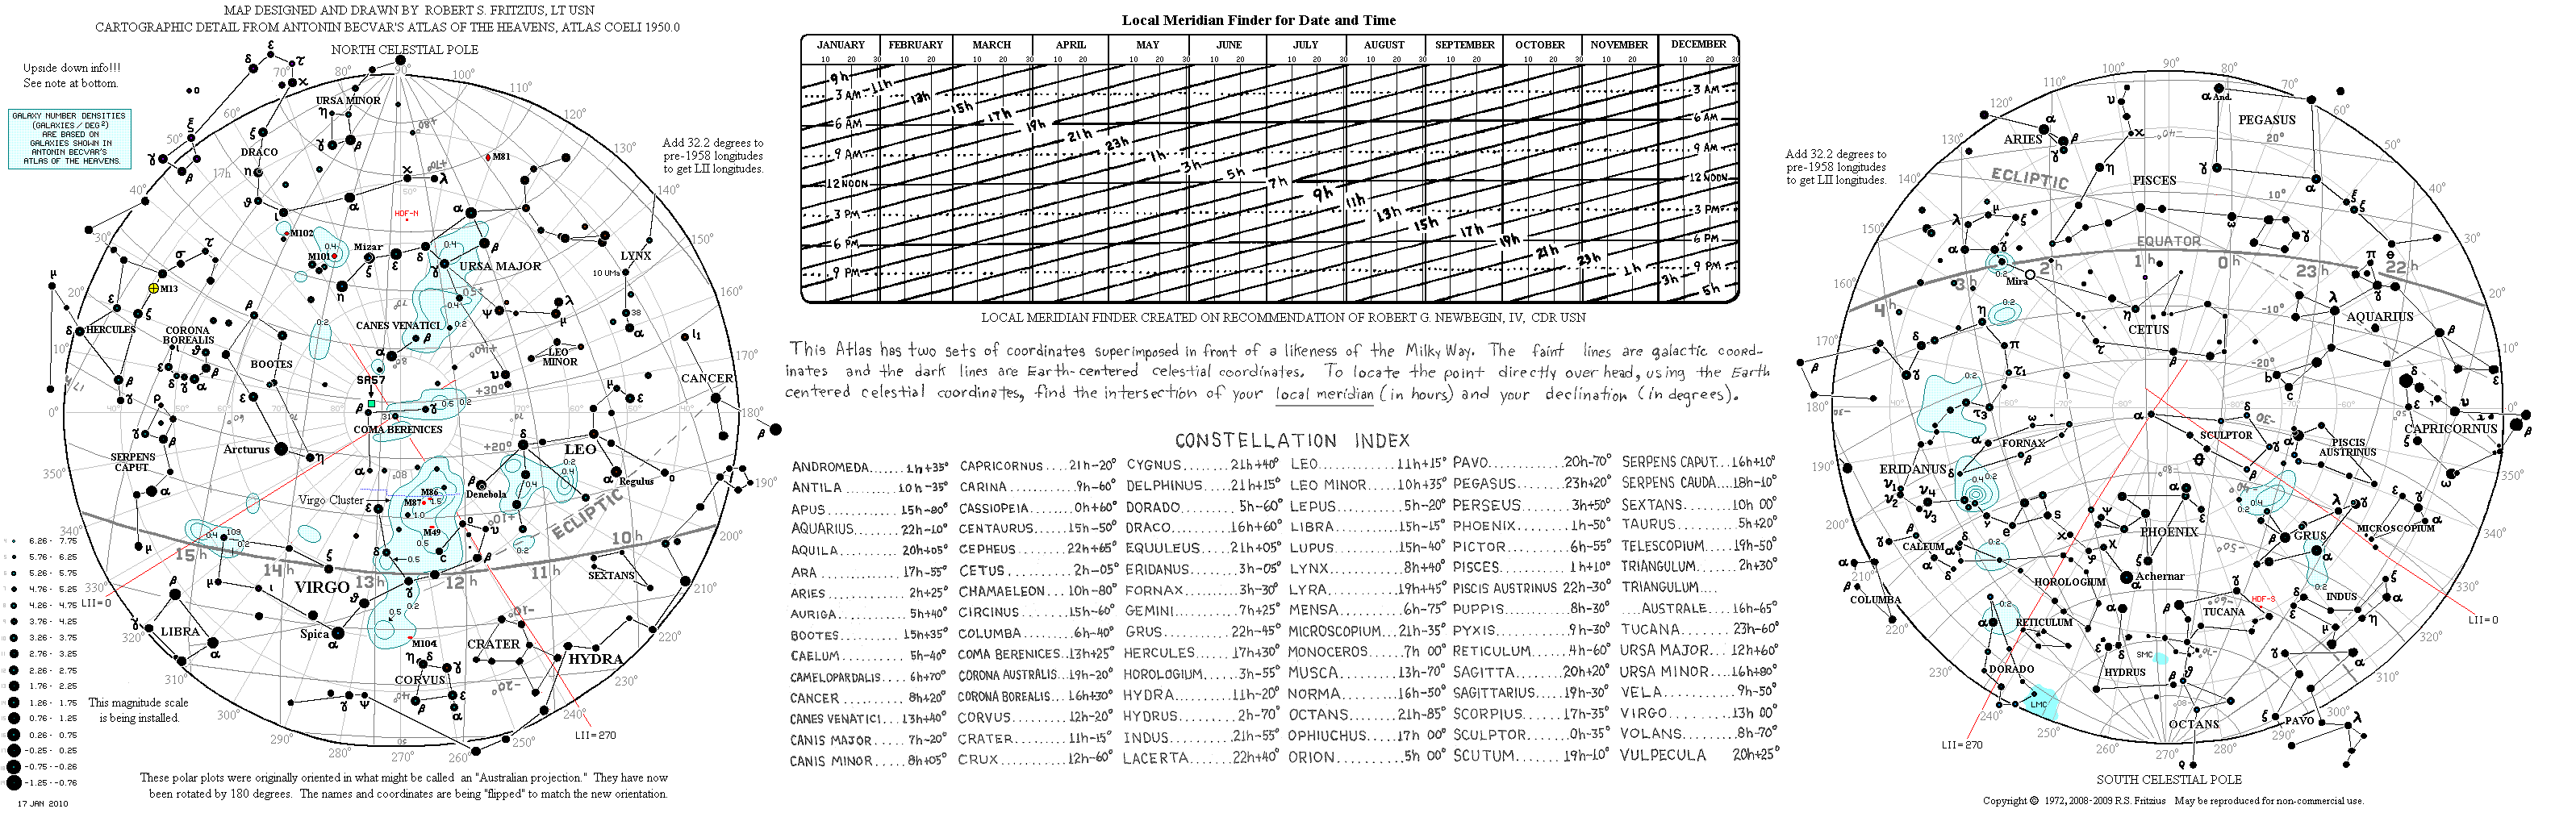 Polar Plots, Constellations Index, and 
local meridian Lookup